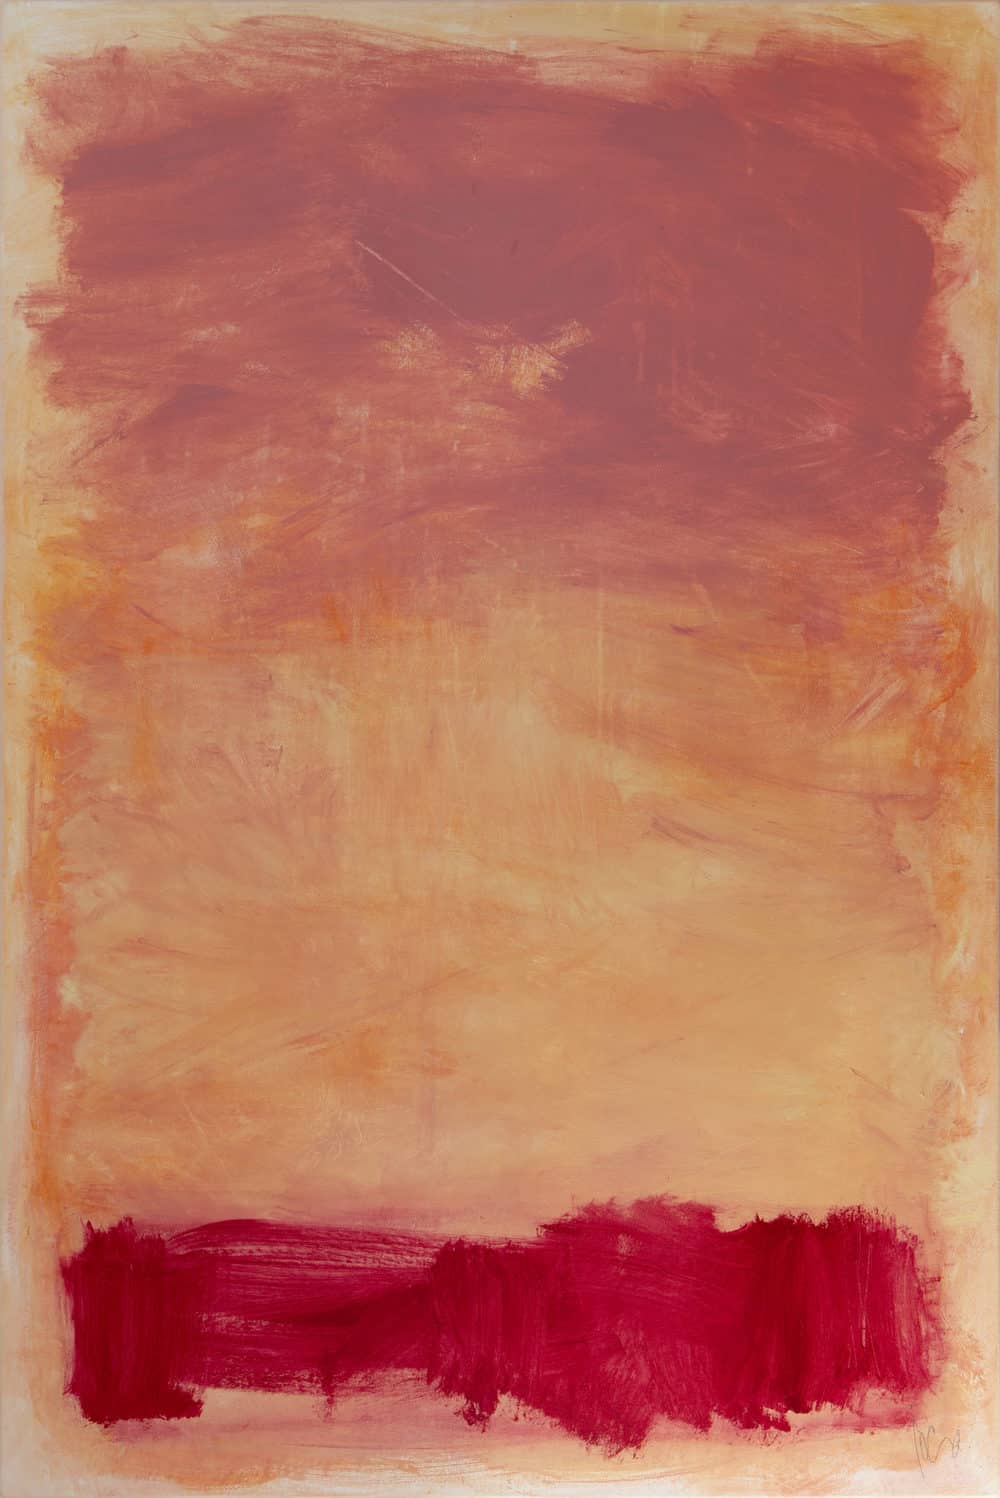 Buy a painting of warm colors called Sunset Rouge.